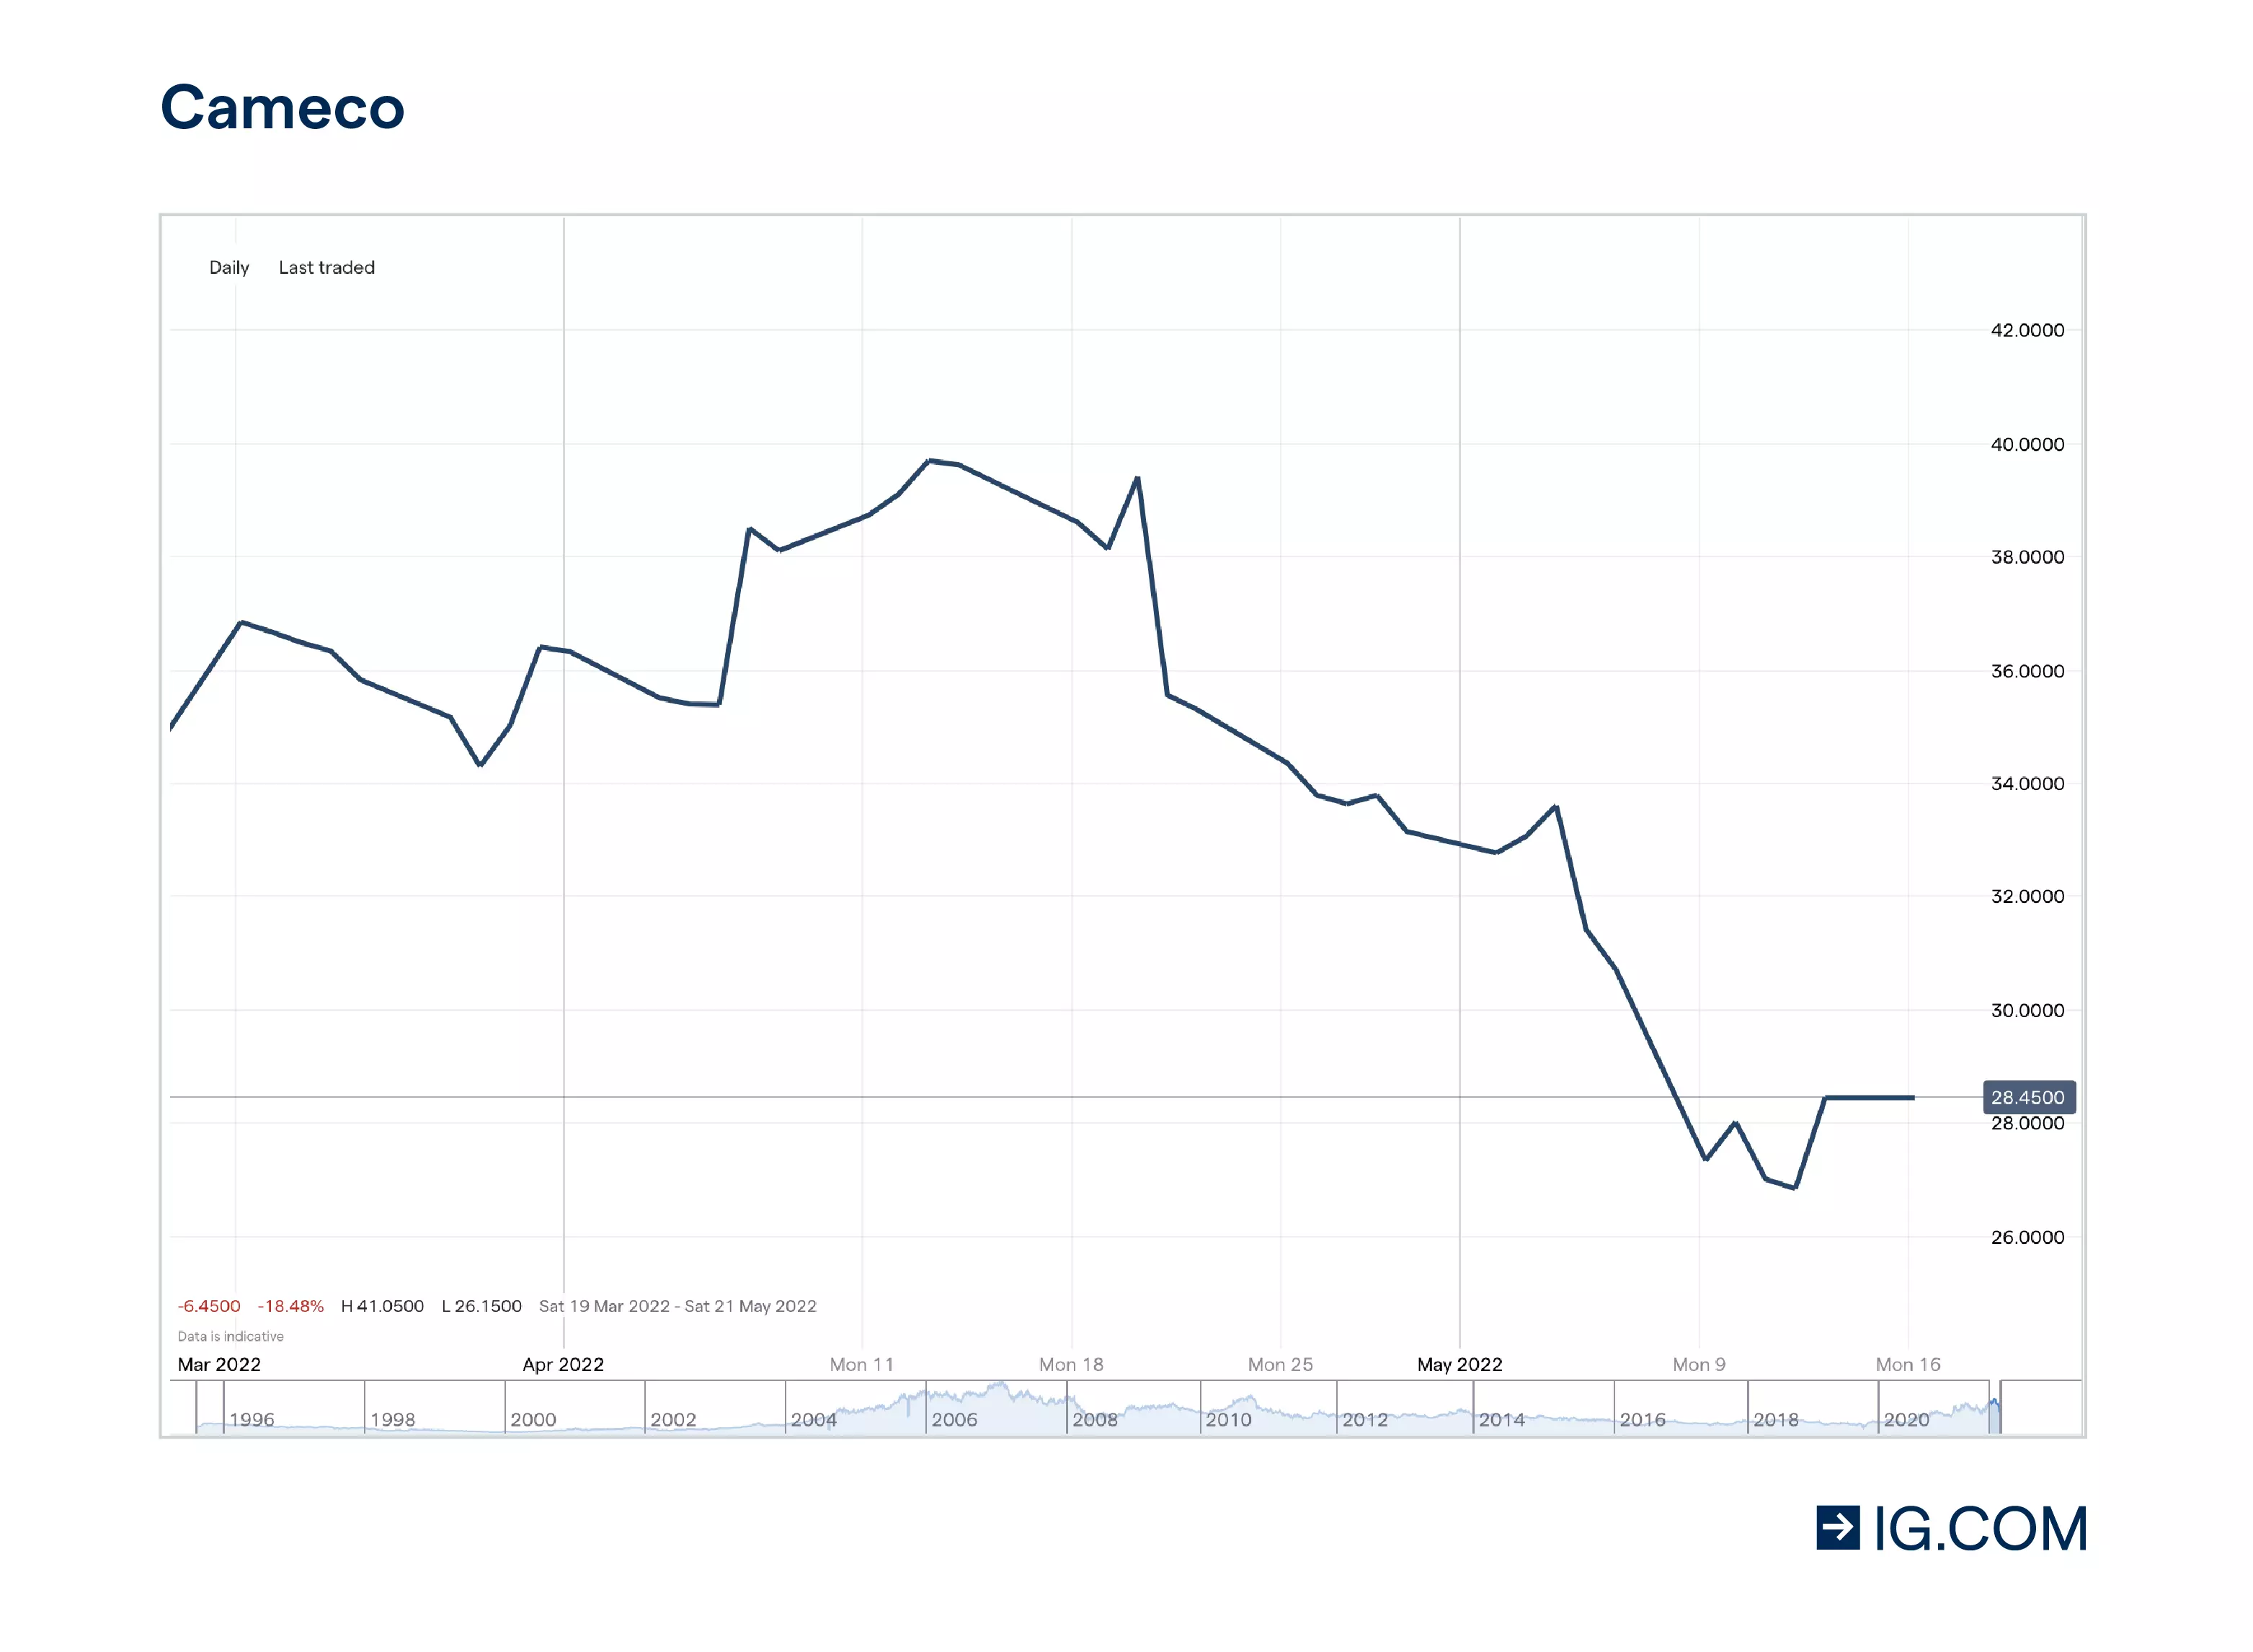 Comeco price chart showing the how the stock has increased from $19.68 a year prior to $35.30 per share